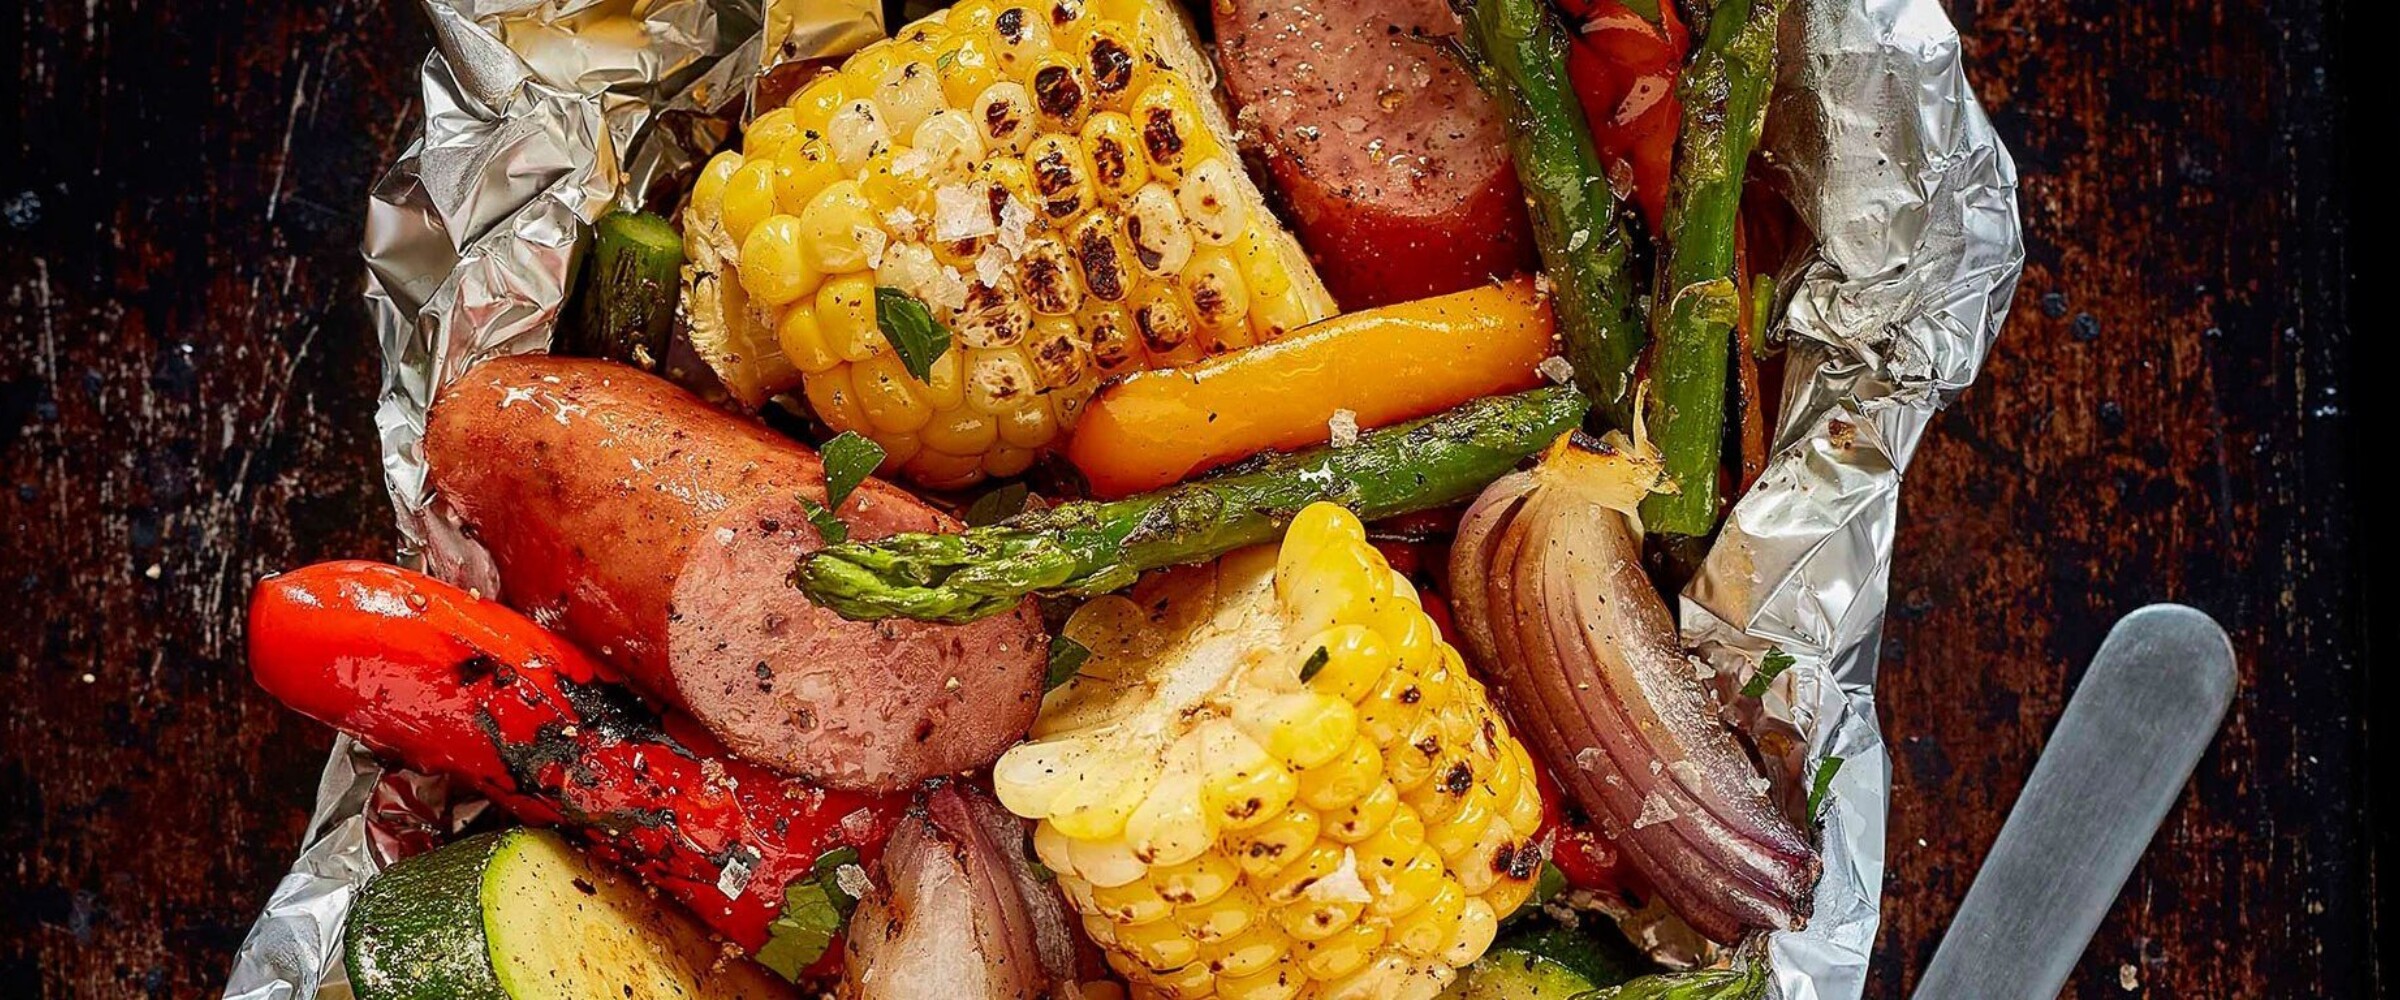 Grillwurst sausage and vegetables grilled in a foil packet